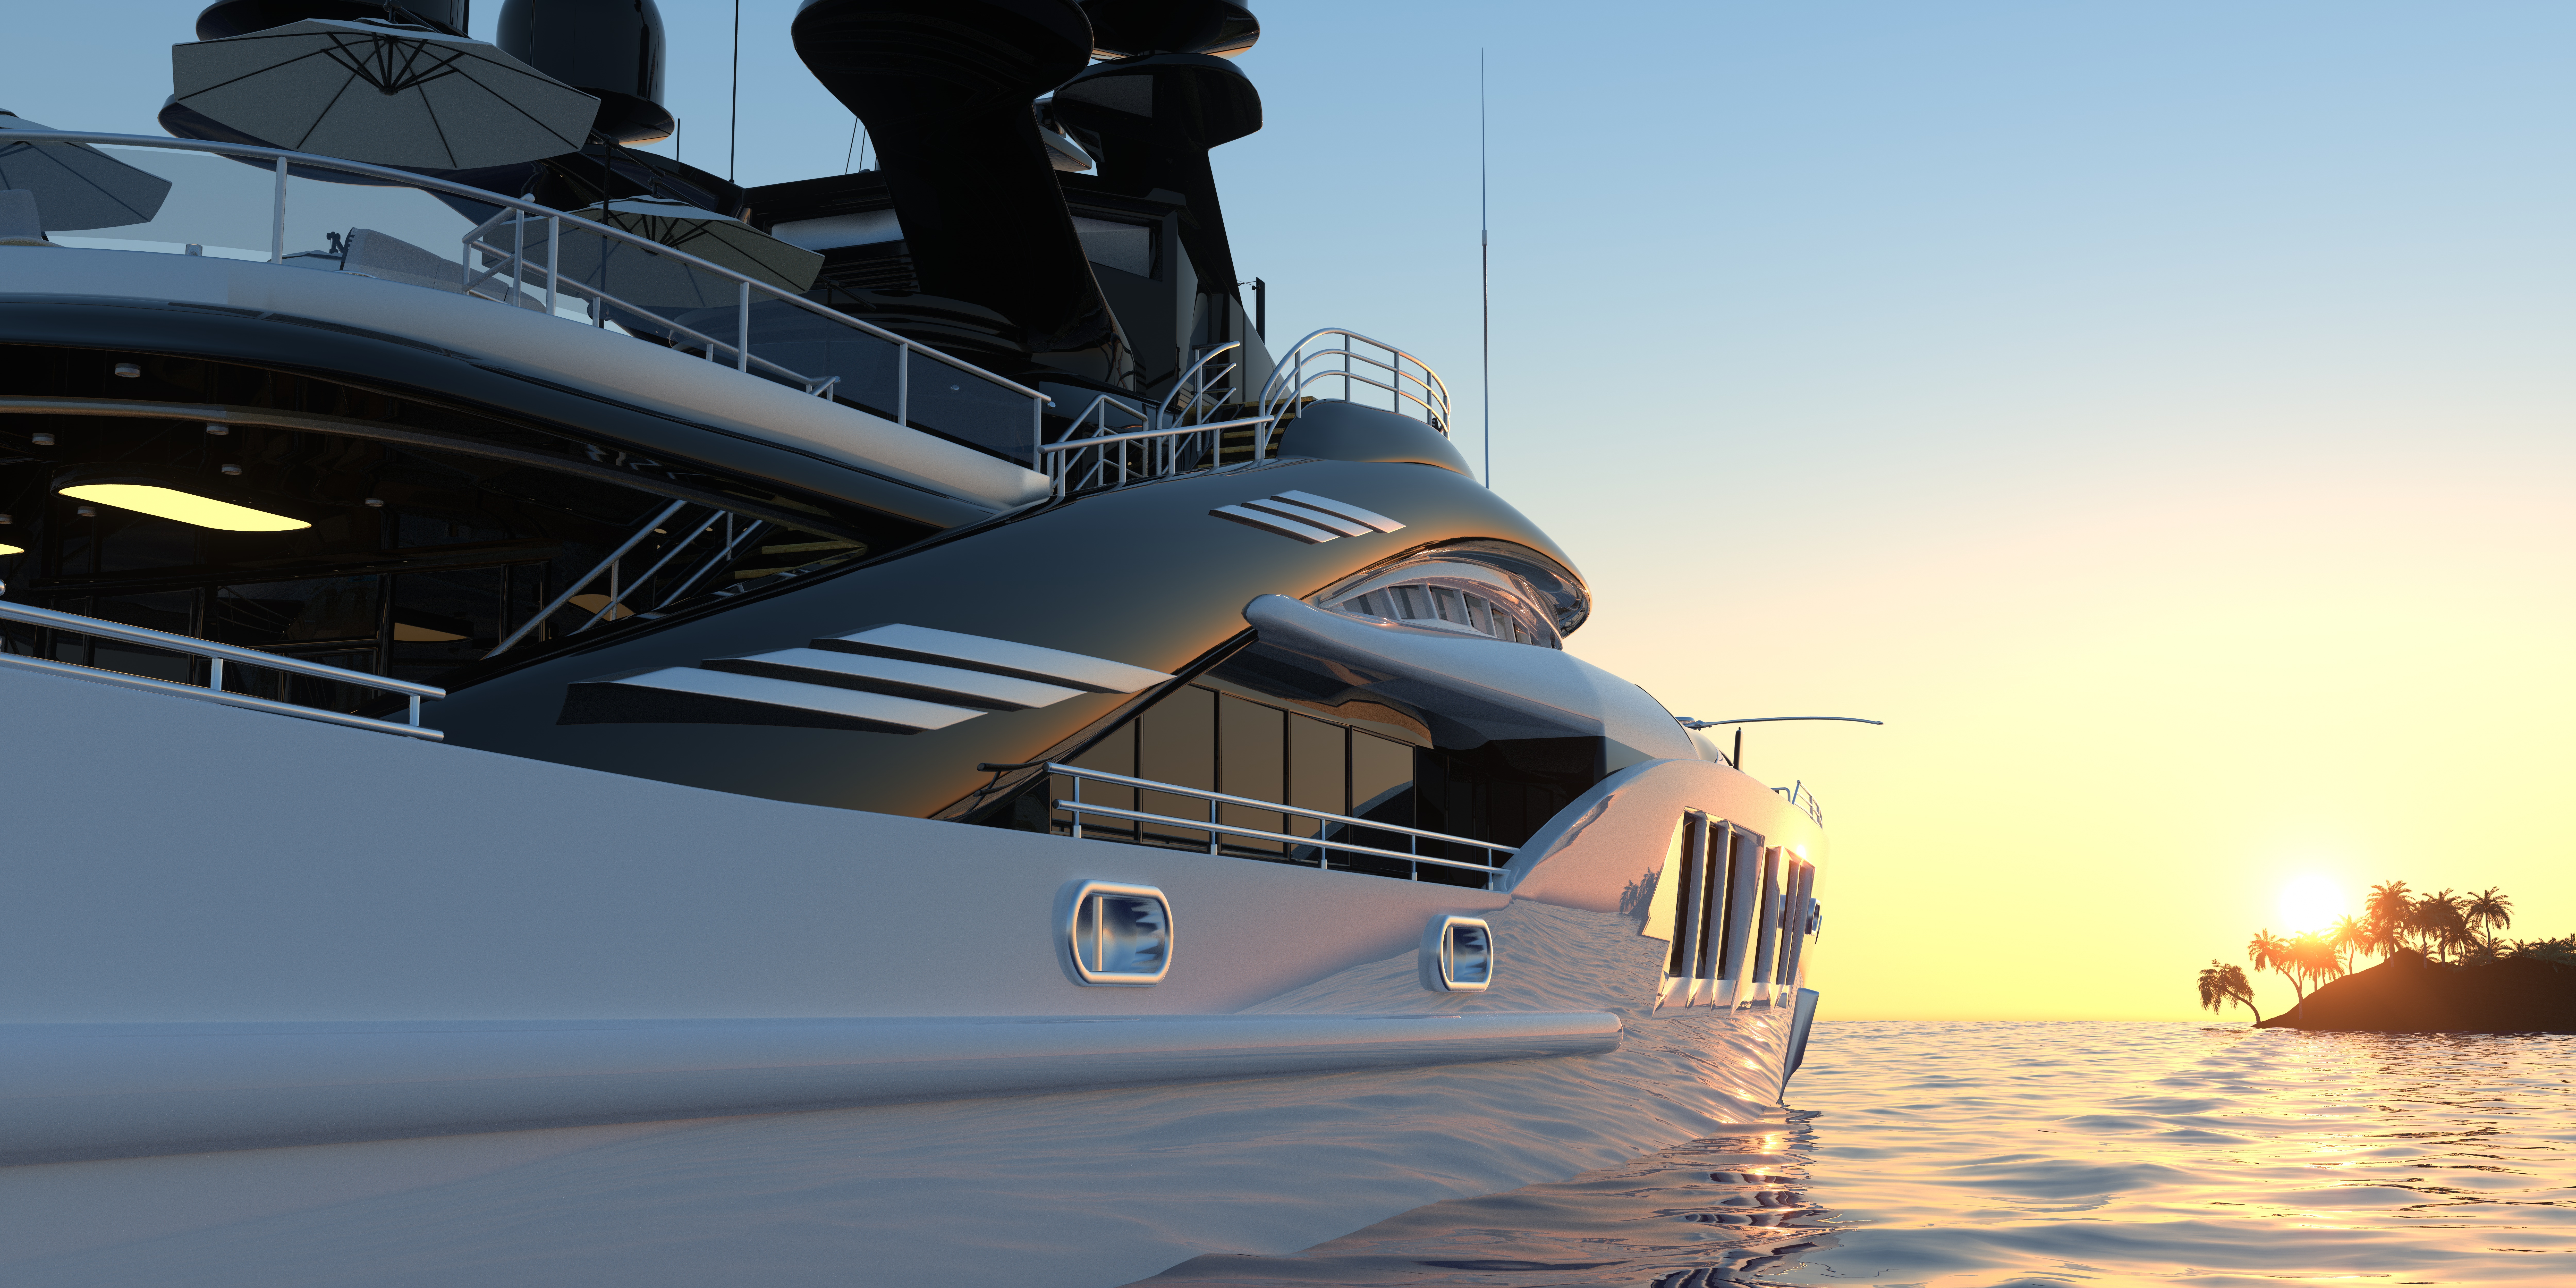 Extremely detailed and realistic high resolution photorealistic 3d image of a luxury super Yacht